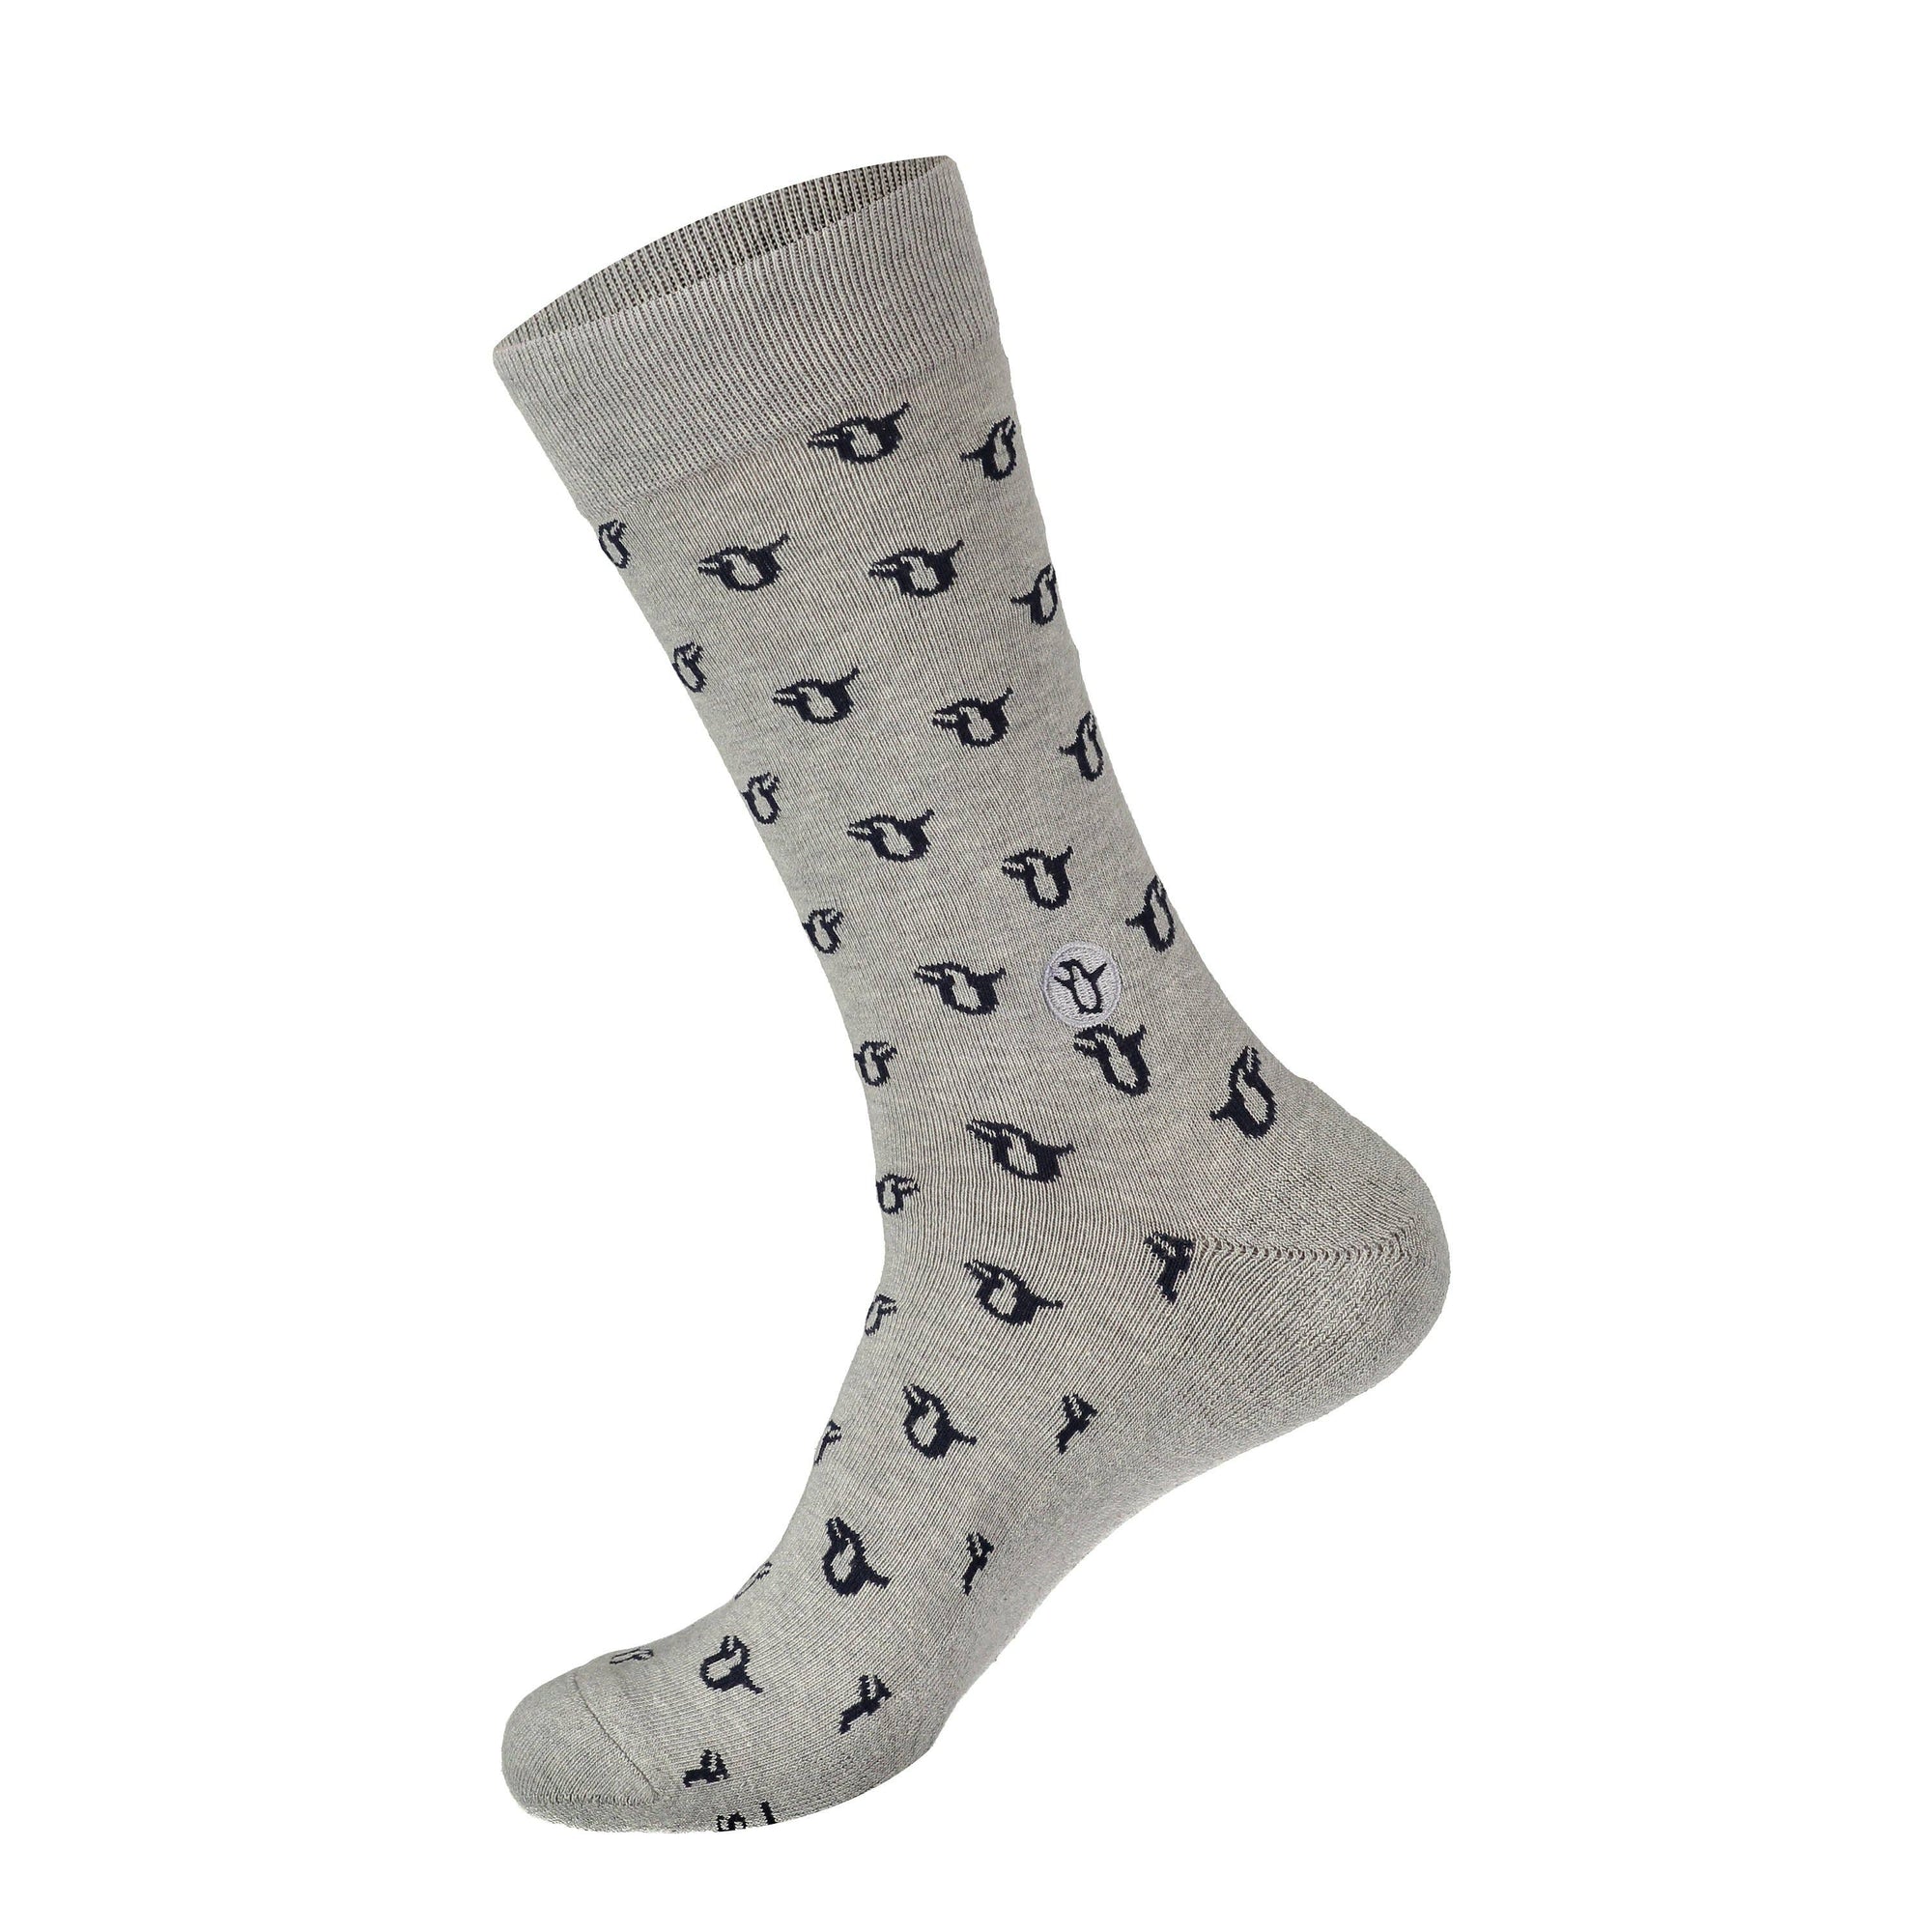 Socks that Protect Penguins (IS)